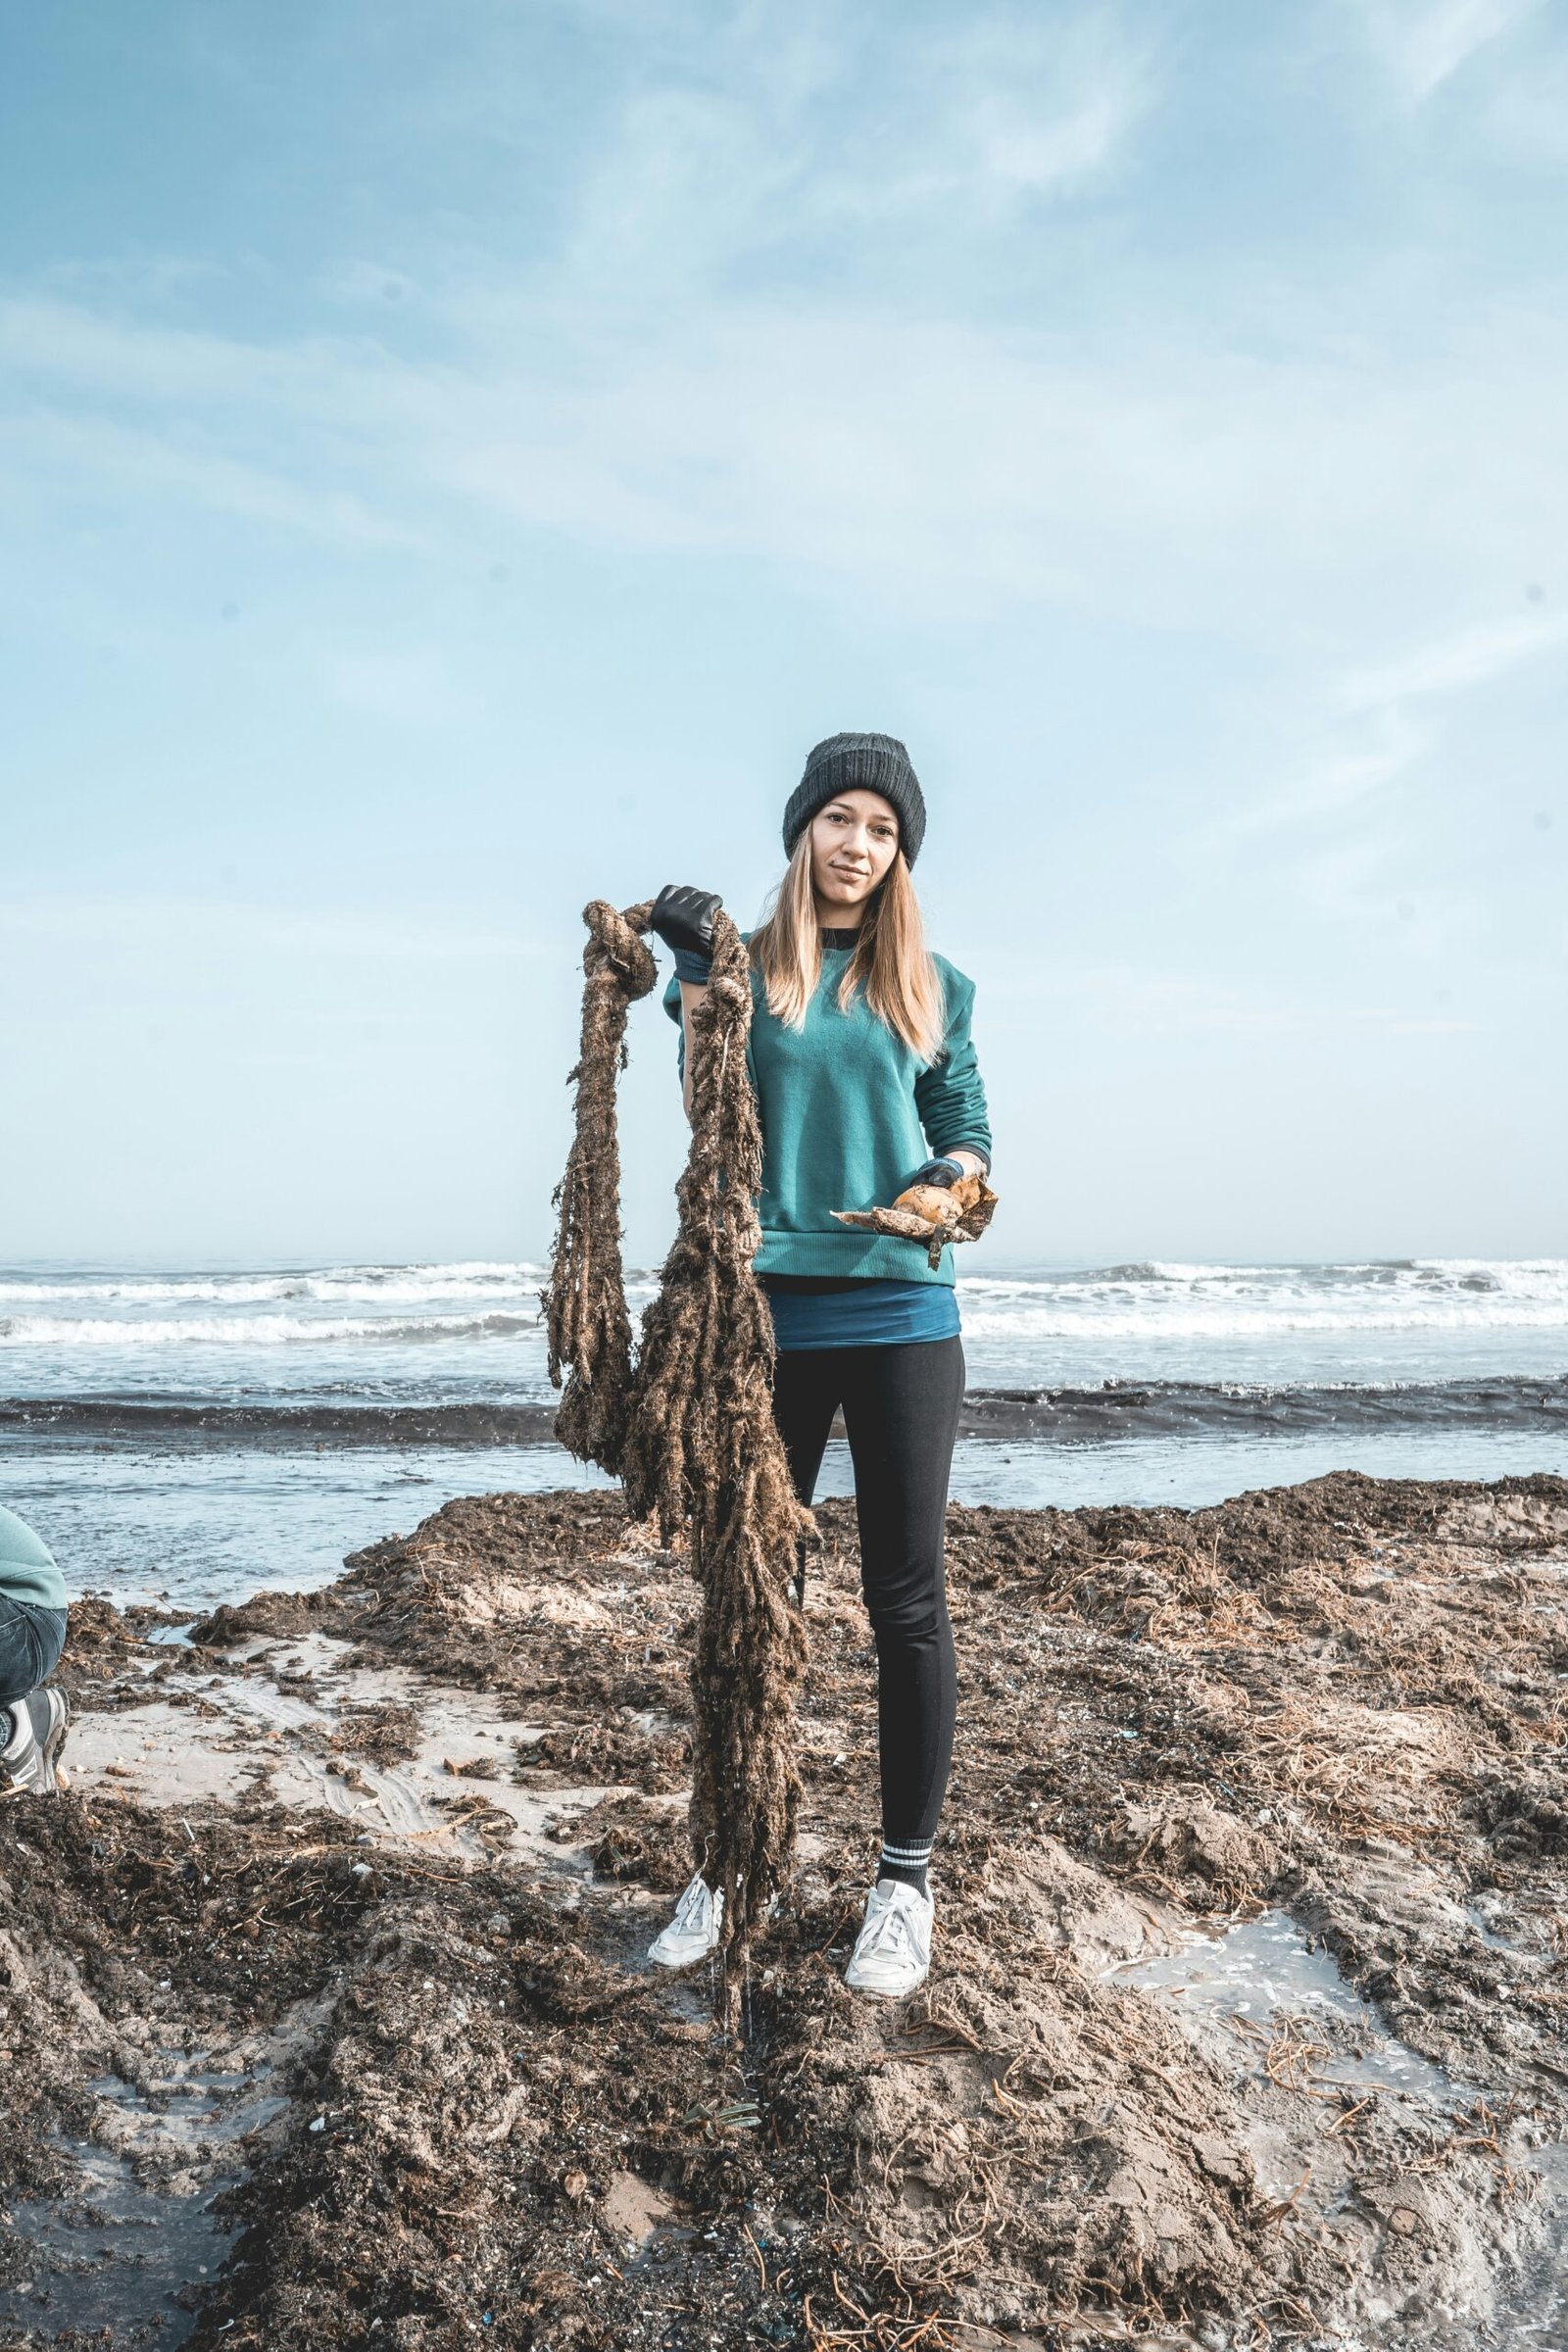 woman in teal long sleeve shirt and black pants standing on brown tree trunk near sea